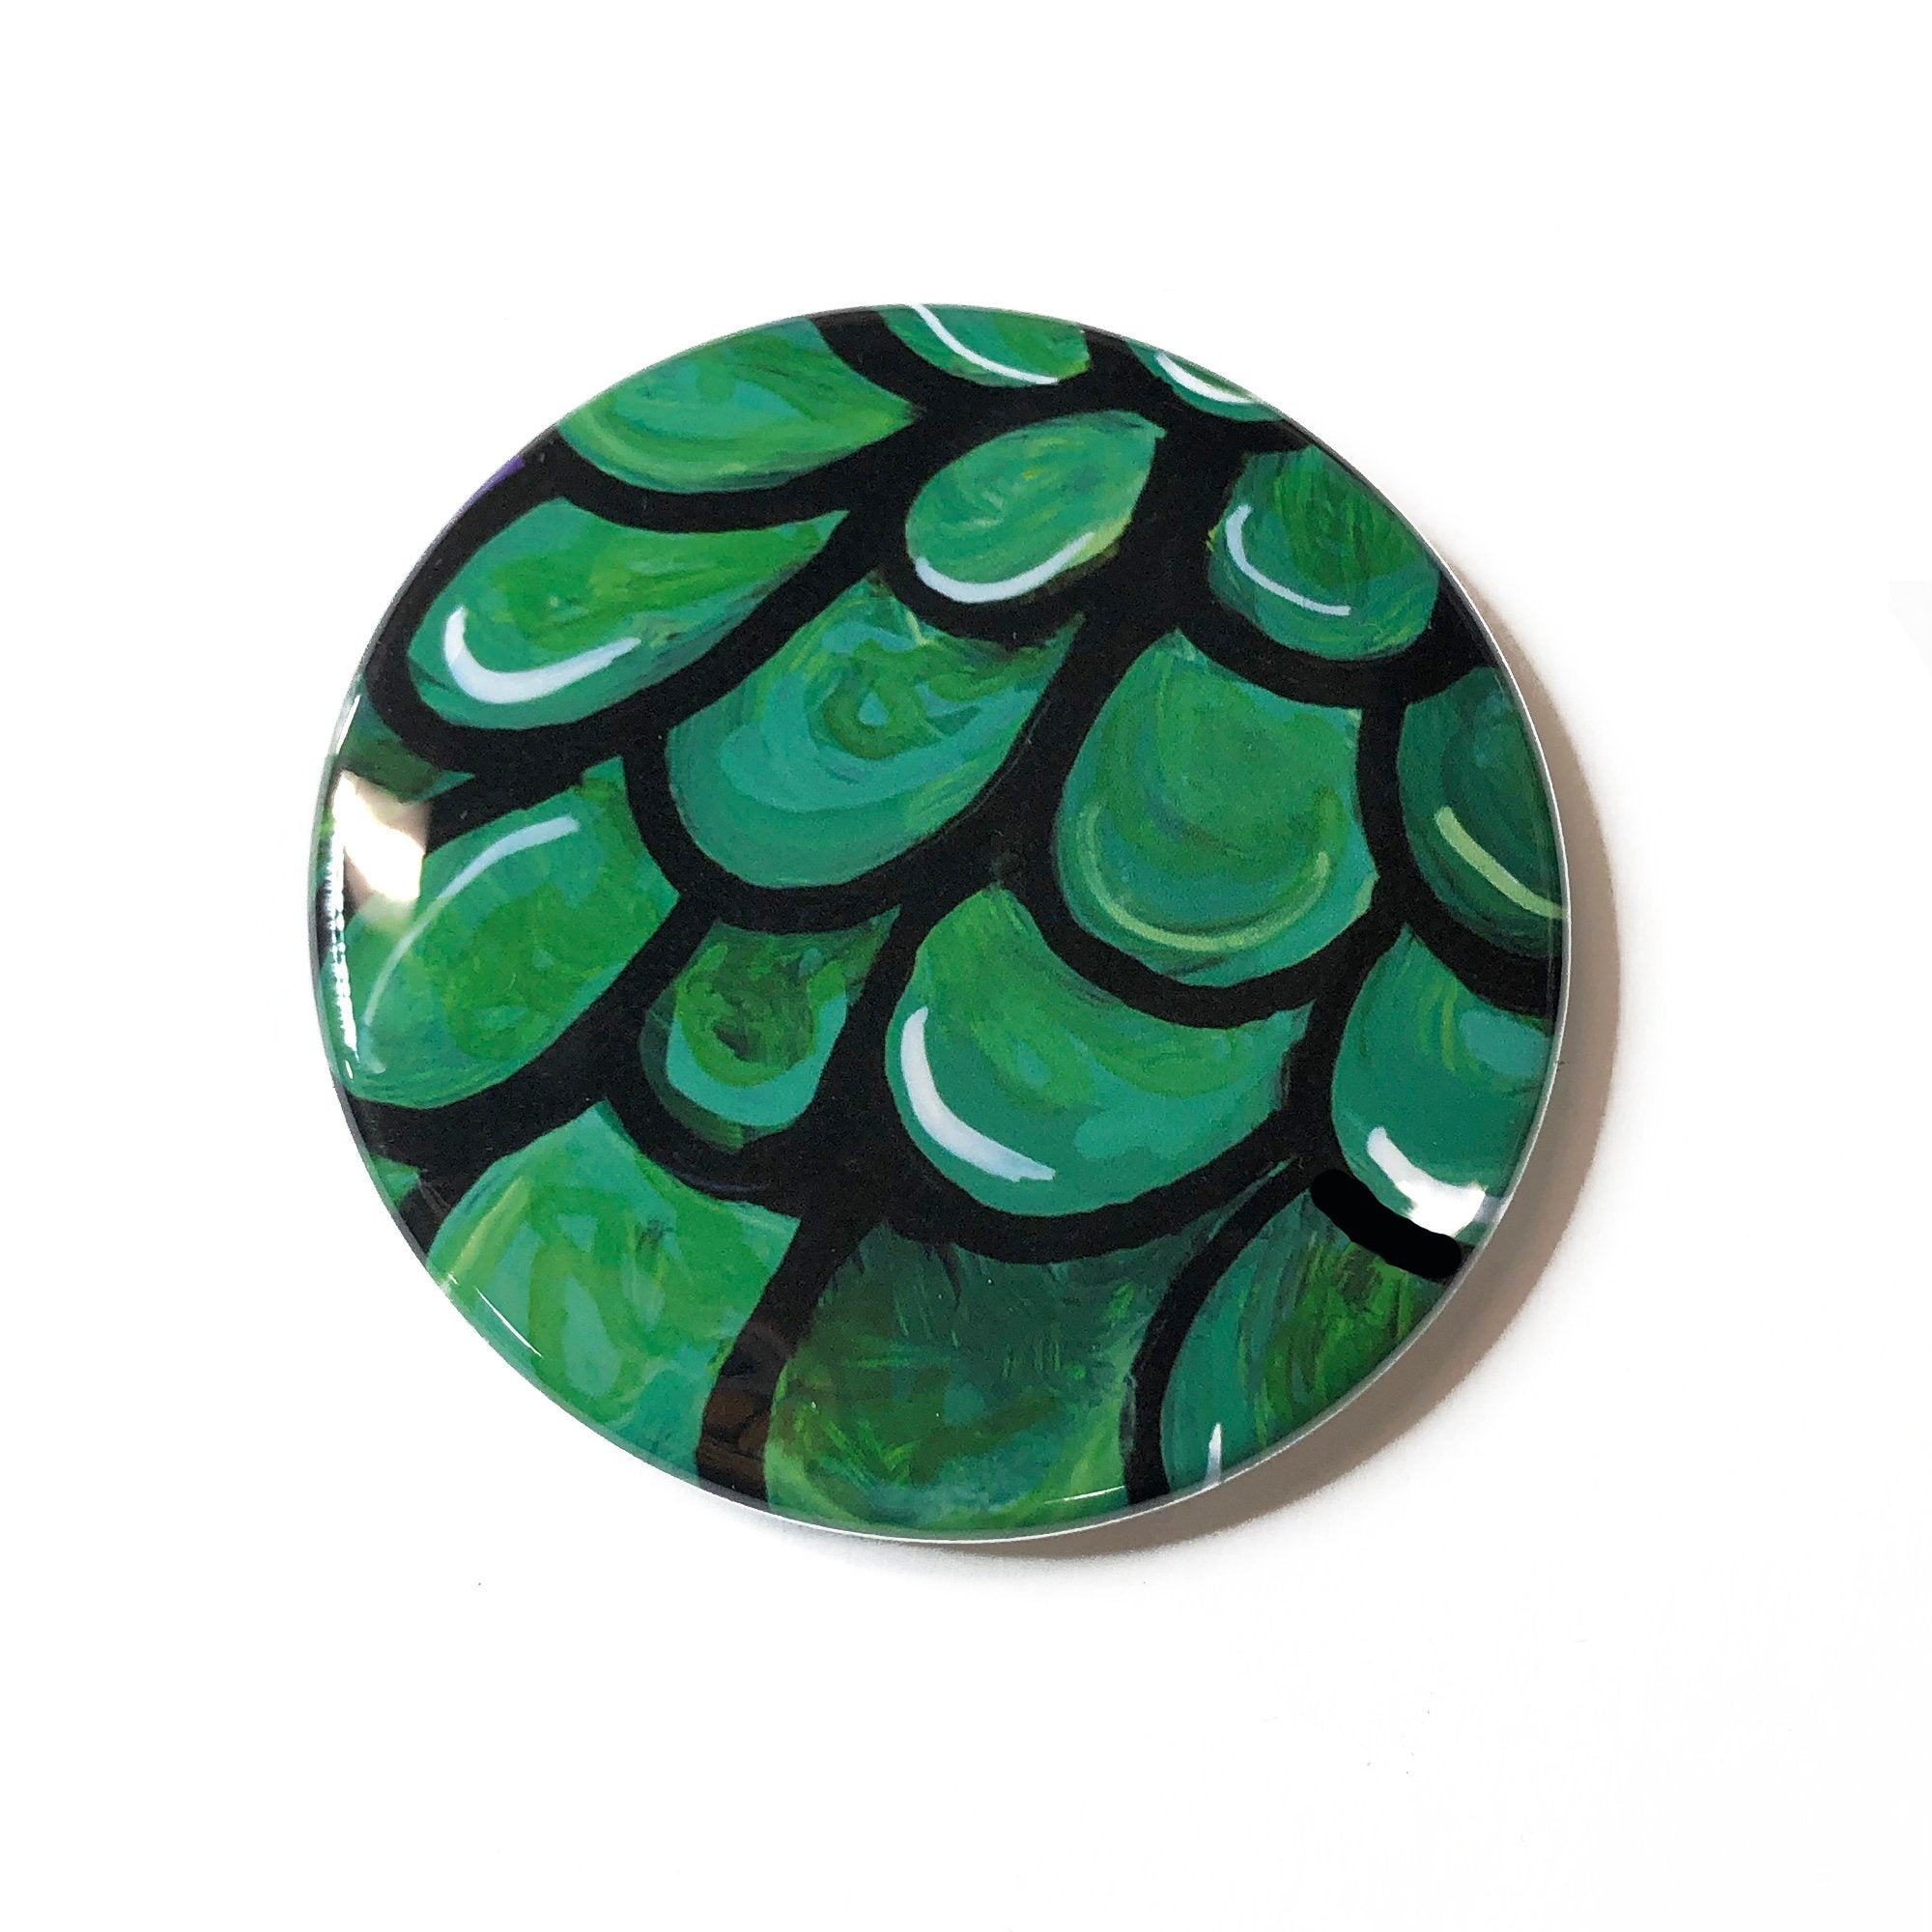 Jade Plant Magnet, Pin Back Button, or Pocket Mirror - Succulent Lover Gift, Party Favor - Fridge Magnet, Pinback, or Purse Mirror